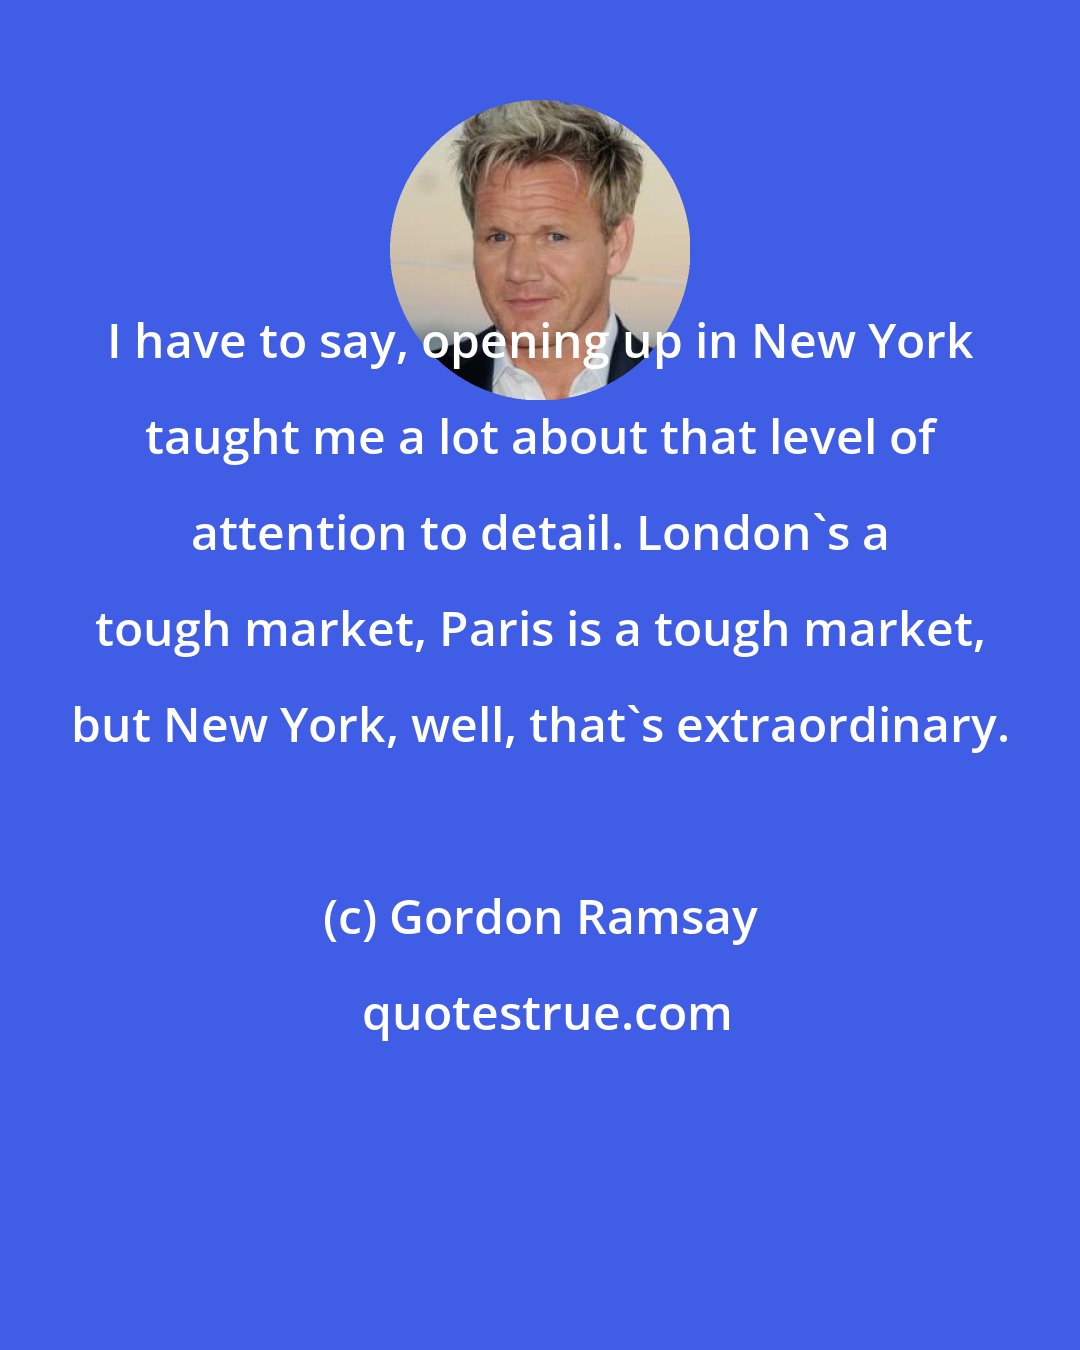 Gordon Ramsay: I have to say, opening up in New York taught me a lot about that level of attention to detail. London's a tough market, Paris is a tough market, but New York, well, that's extraordinary.